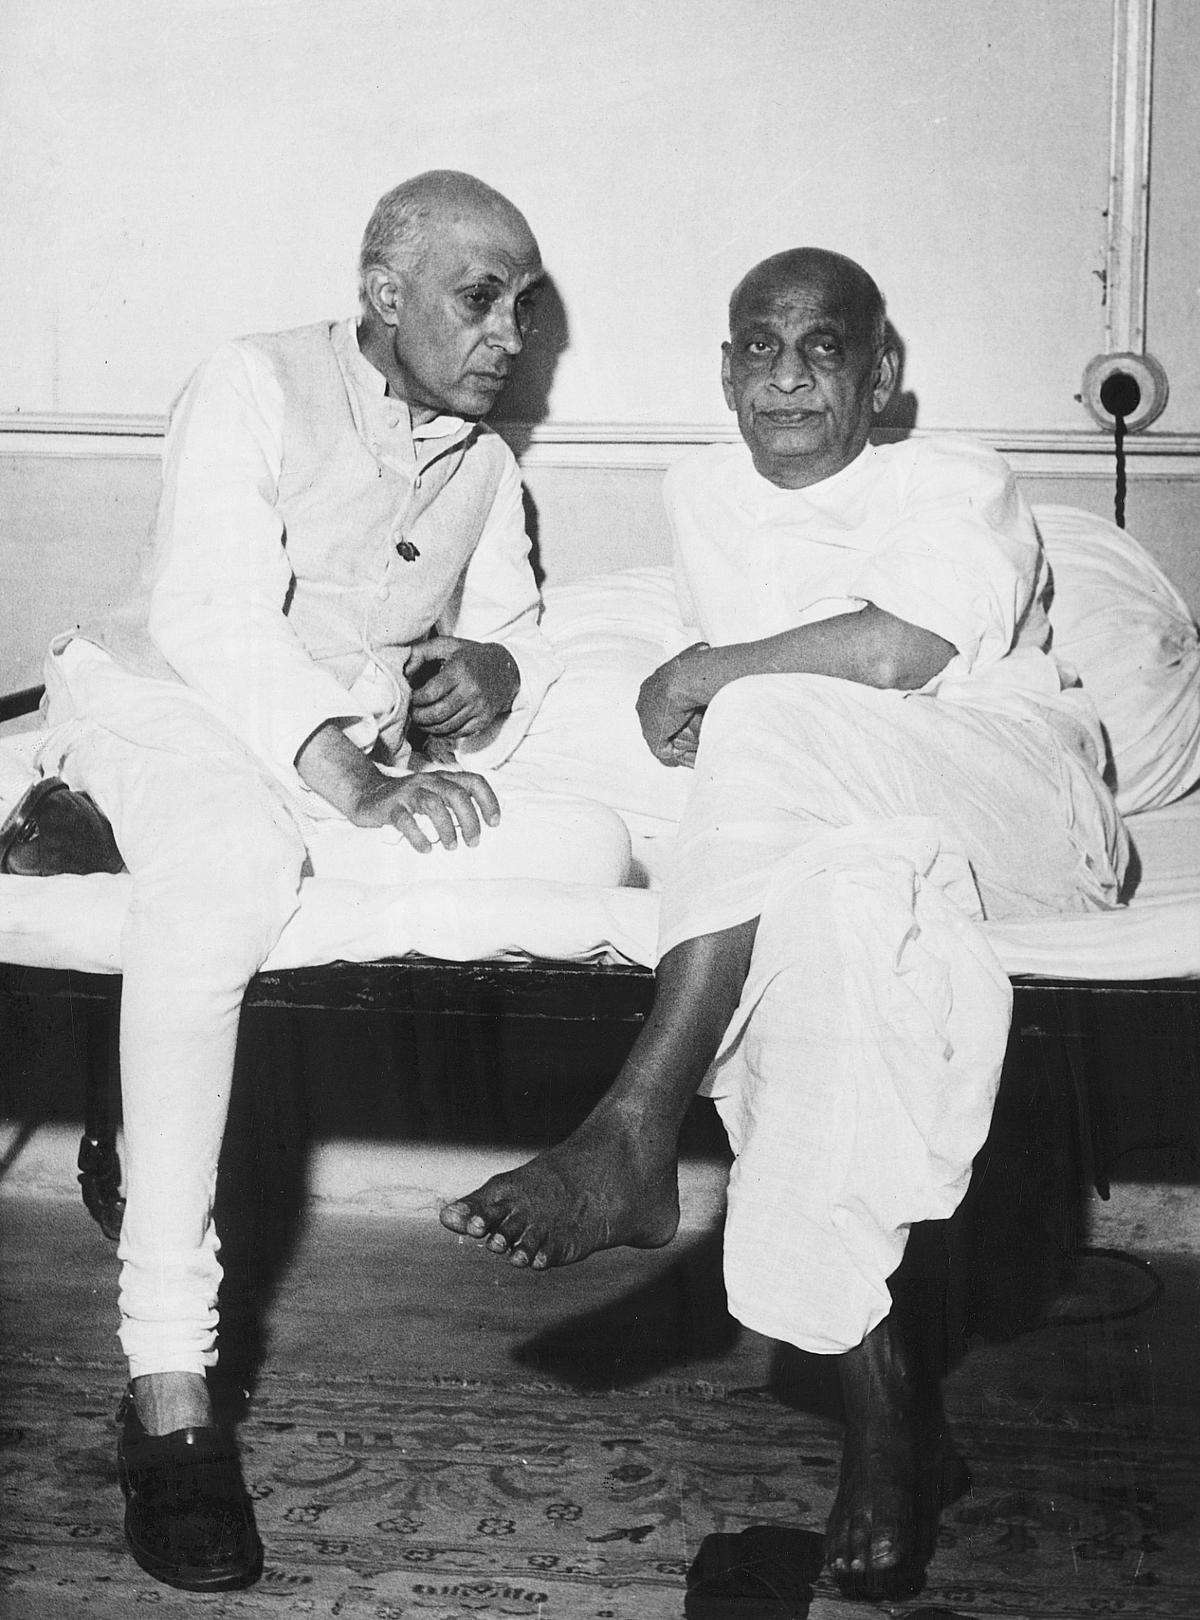 sardar-patel-and-nehru-remembering-the-legacies-of-india-s-two-great-leaders-2